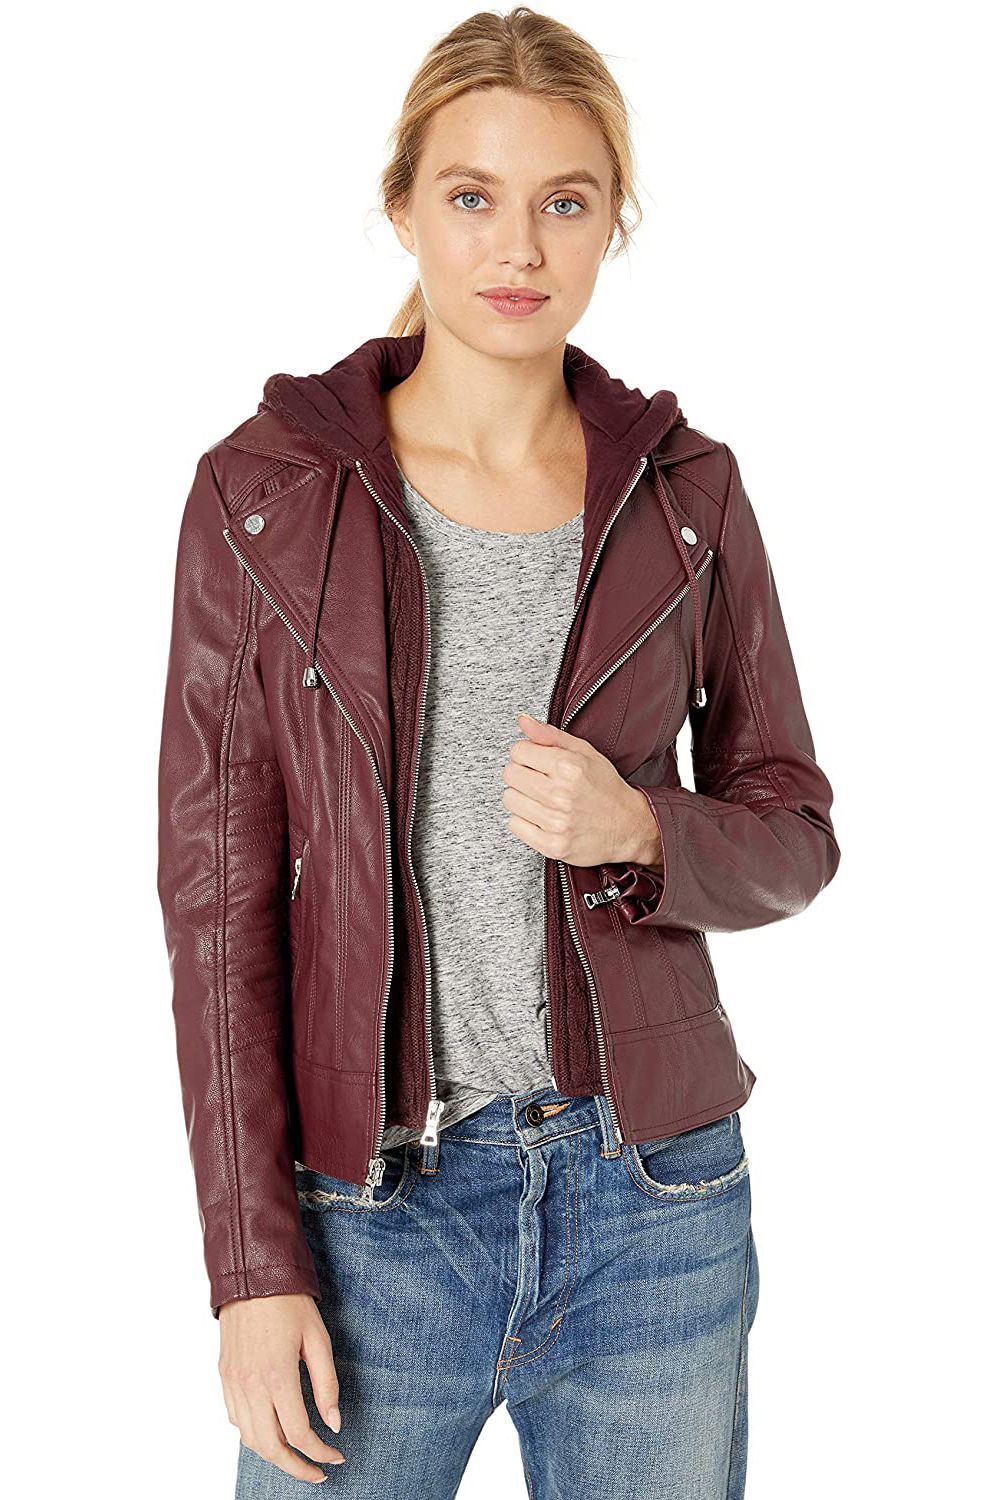 guess maroon leather jacket